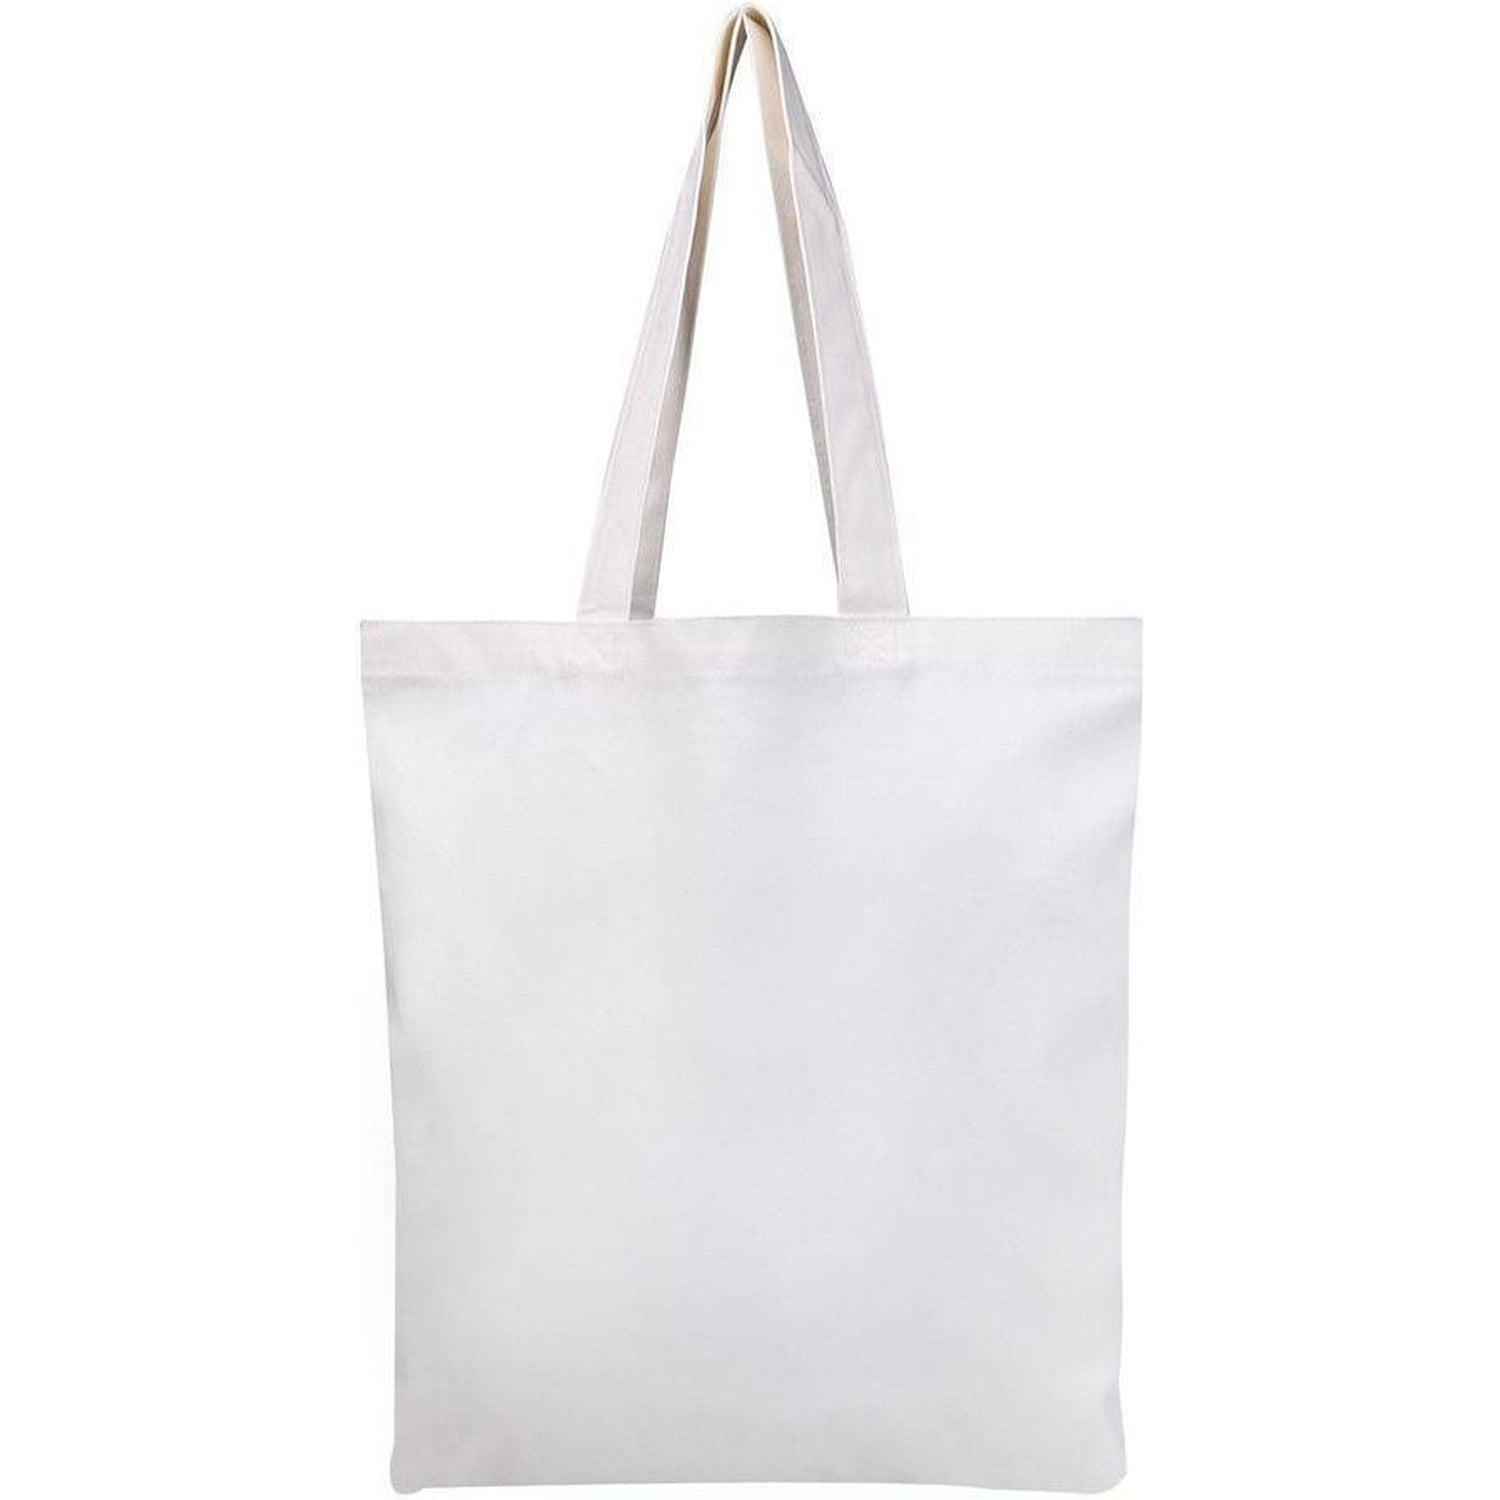 Wholesale Standard Size Canvas Tote Bags in Bulk – BagzDepot™